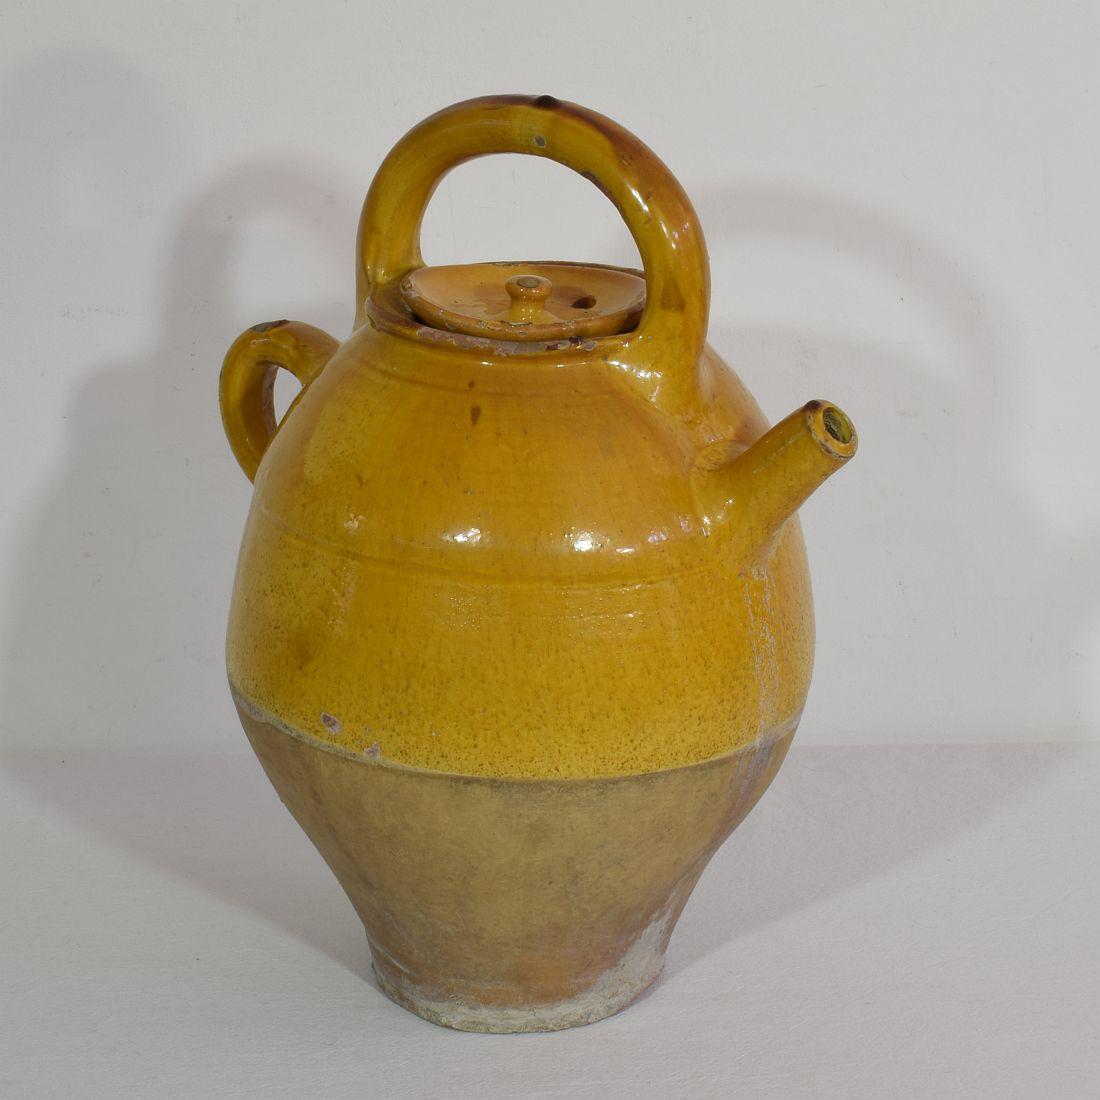 Great authentic and rare piece of pottery from the Provence. Beautiful weathered and an amazing color. Imperfections help authenticate this water cruche as it was an utilitarian type piece, France, circa 1850.